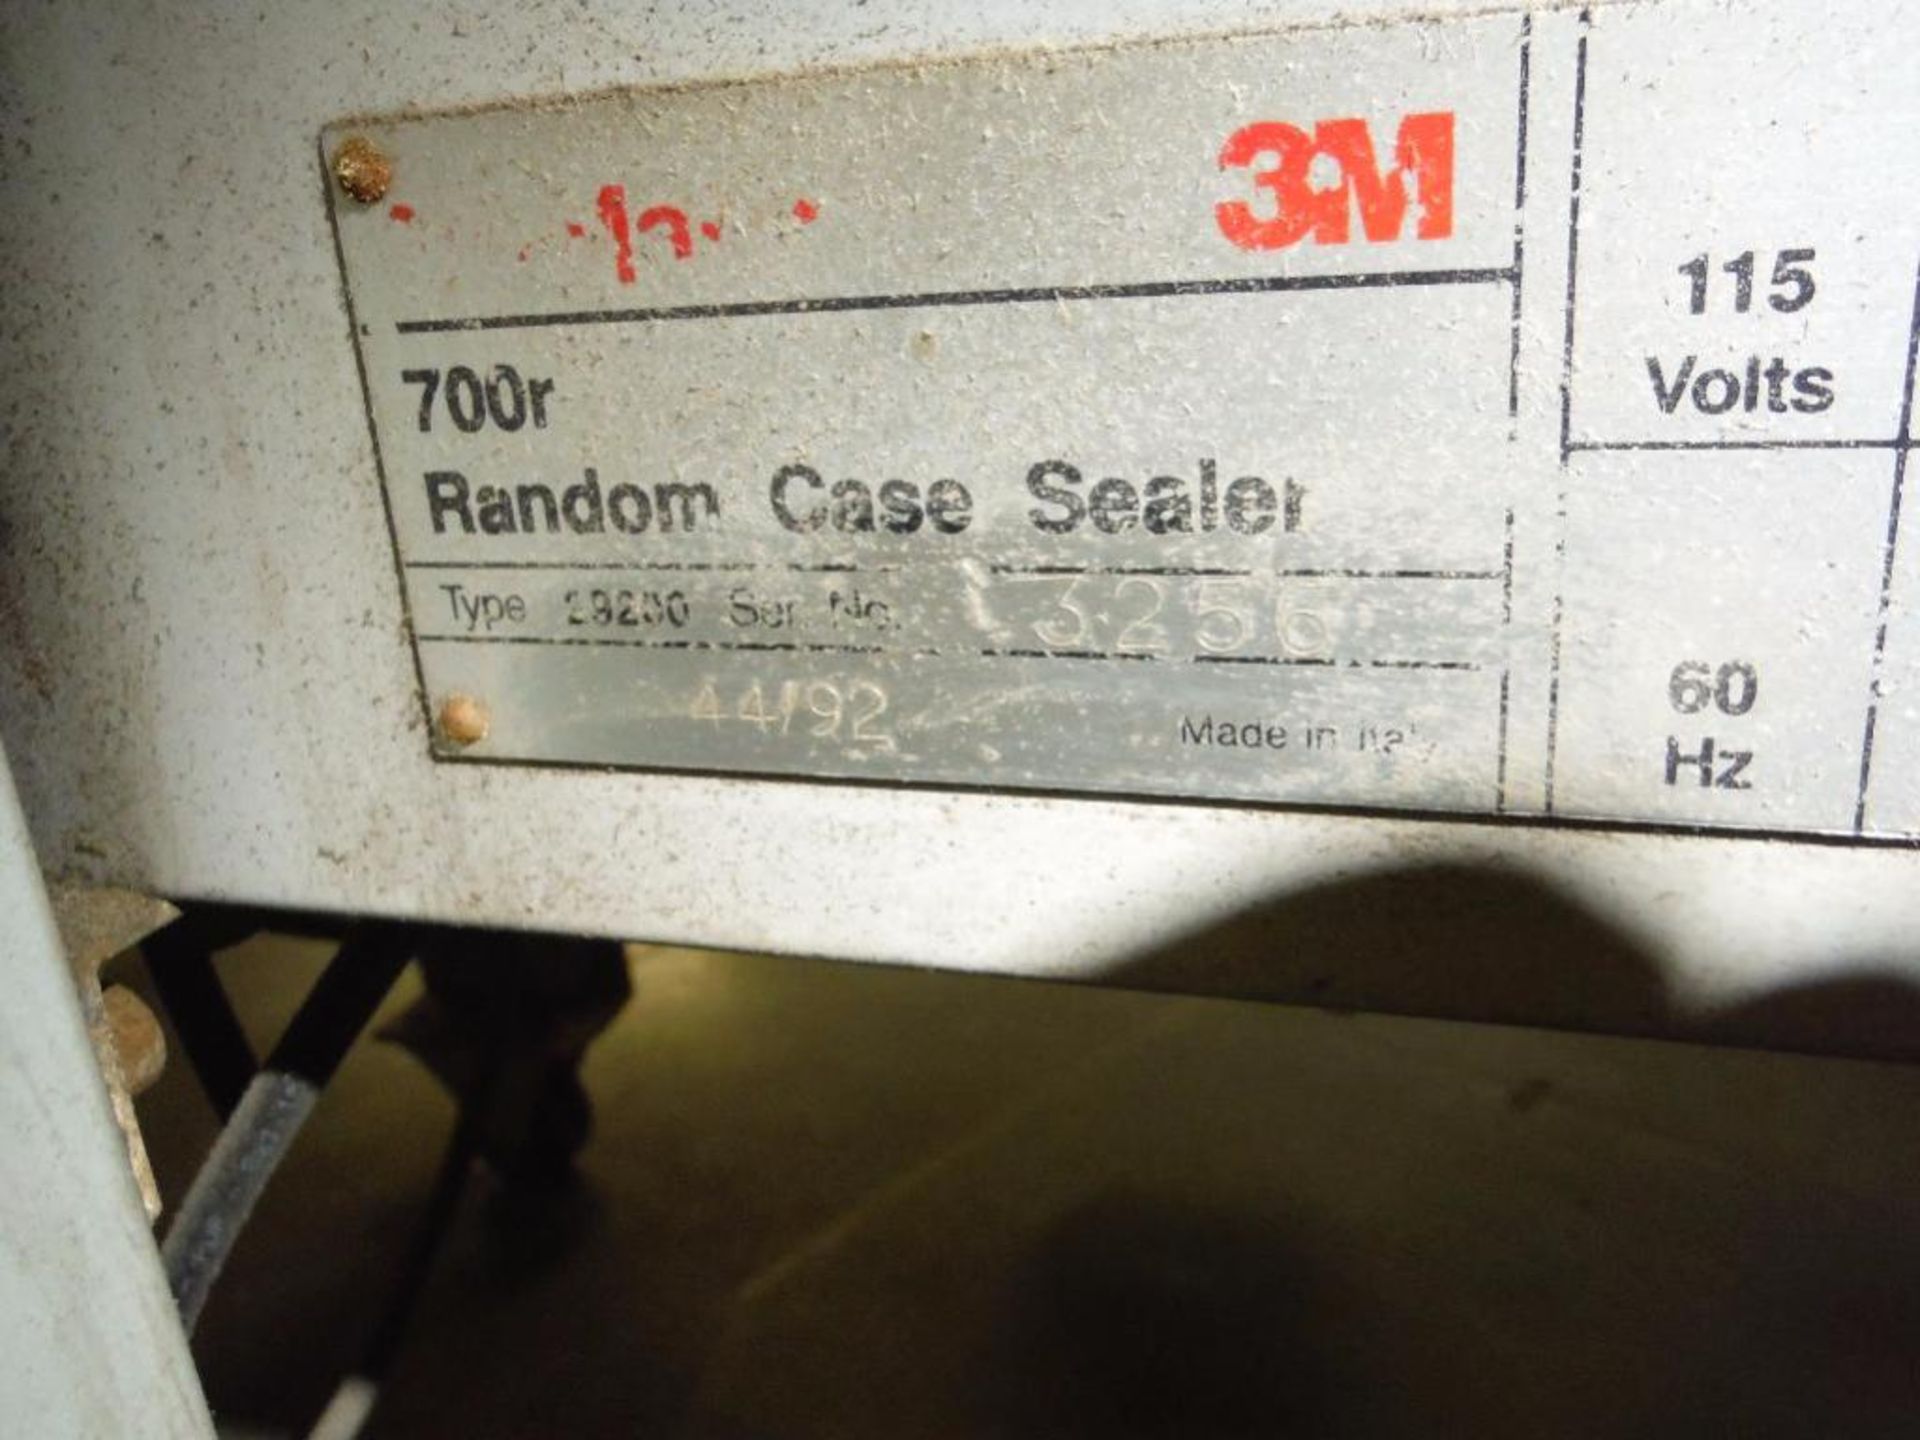 3M matic case sealer, Type 29200, Model 700R, SN 3256, top and bottom ** Rigging Fee: $150 ** - Image 6 of 8